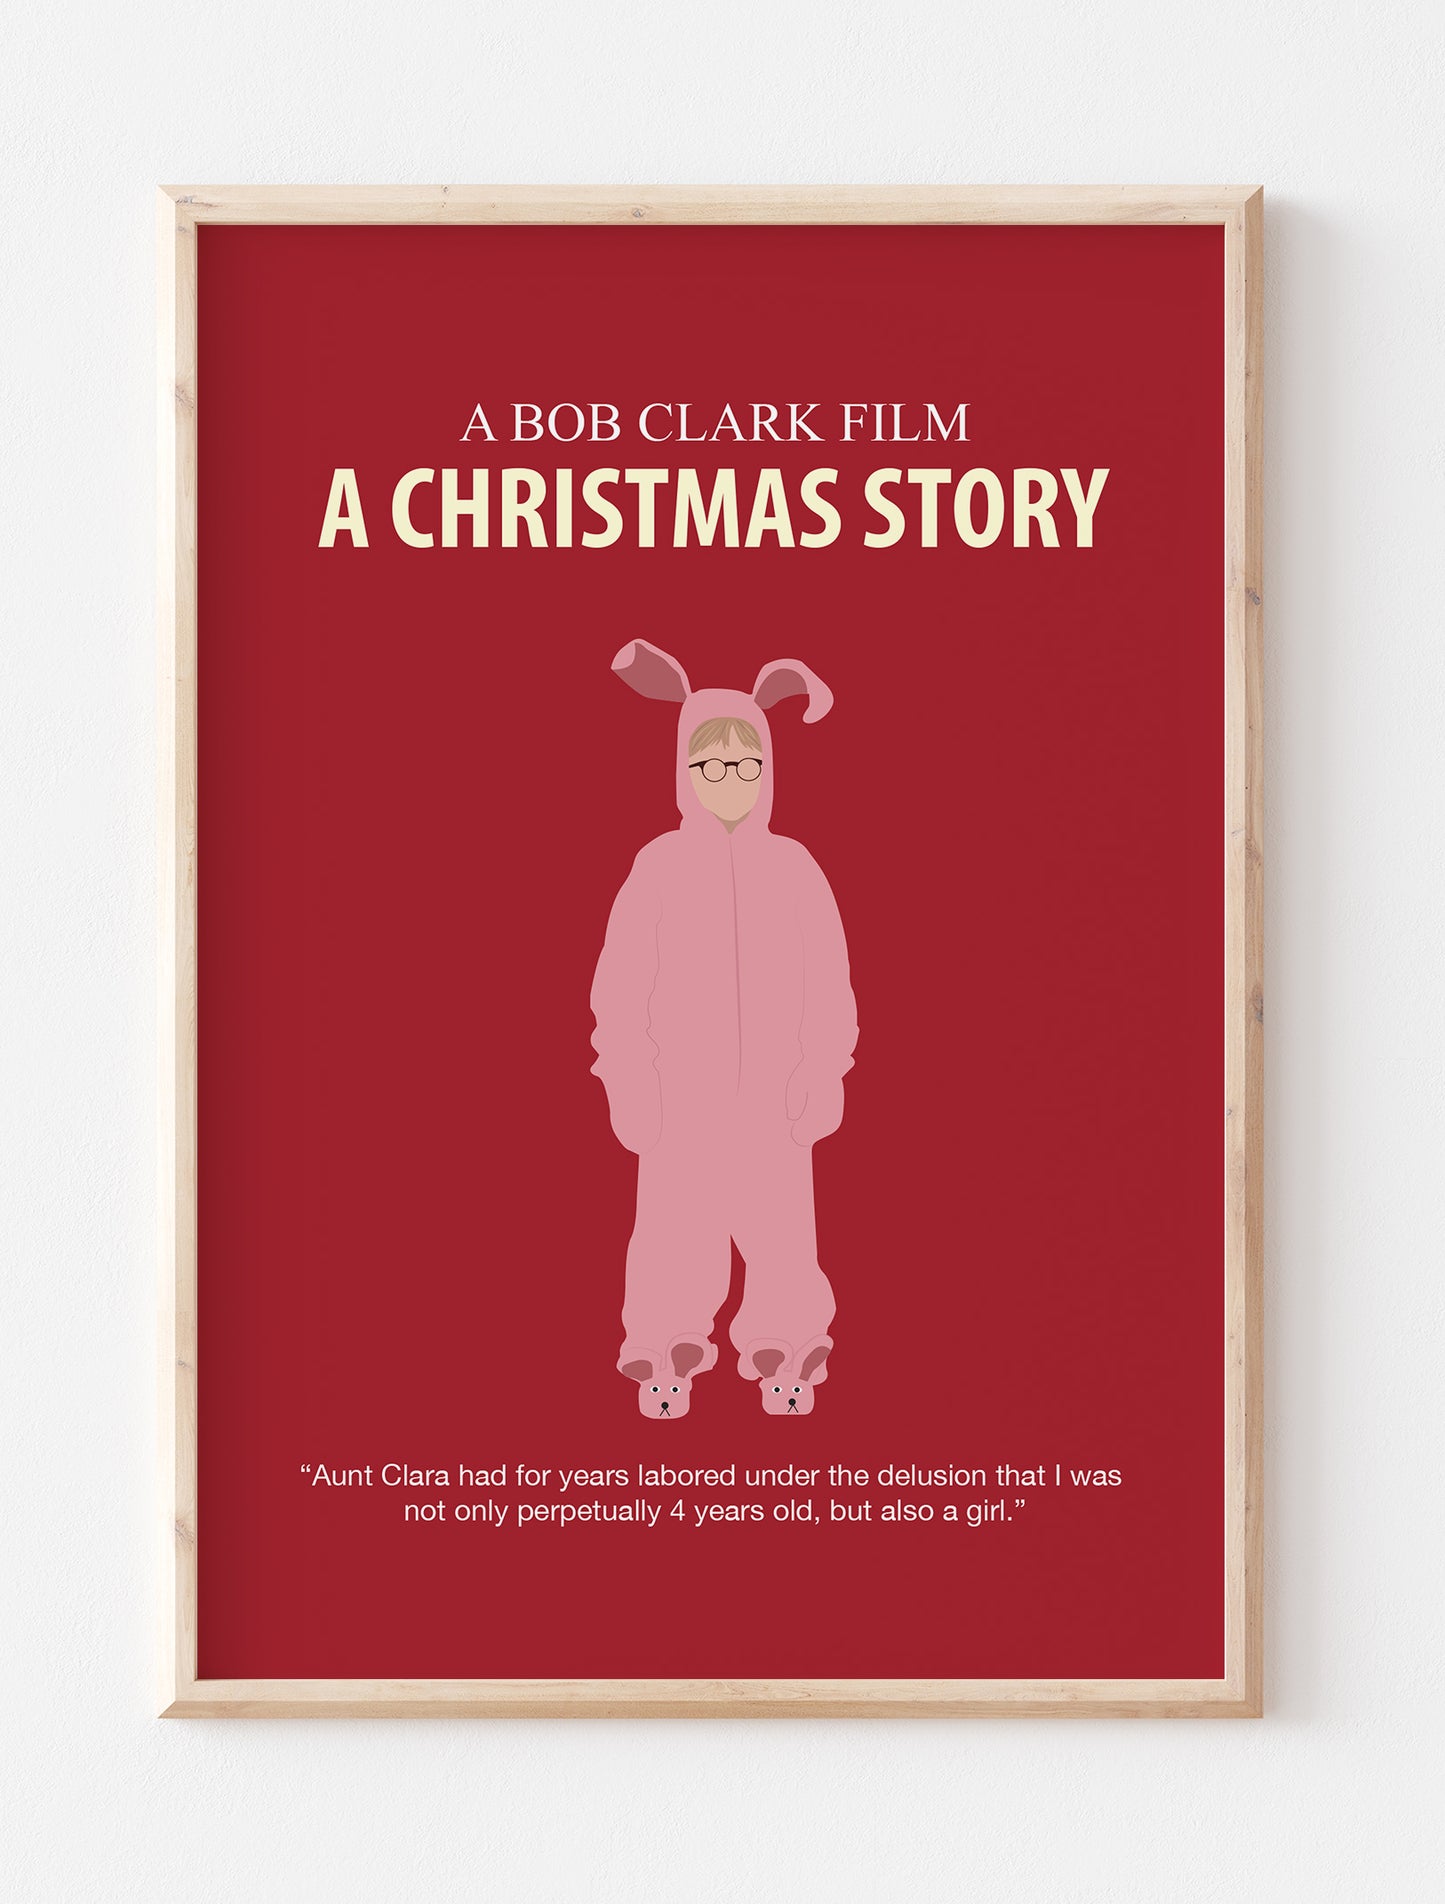 A Christmas Story Poster 1